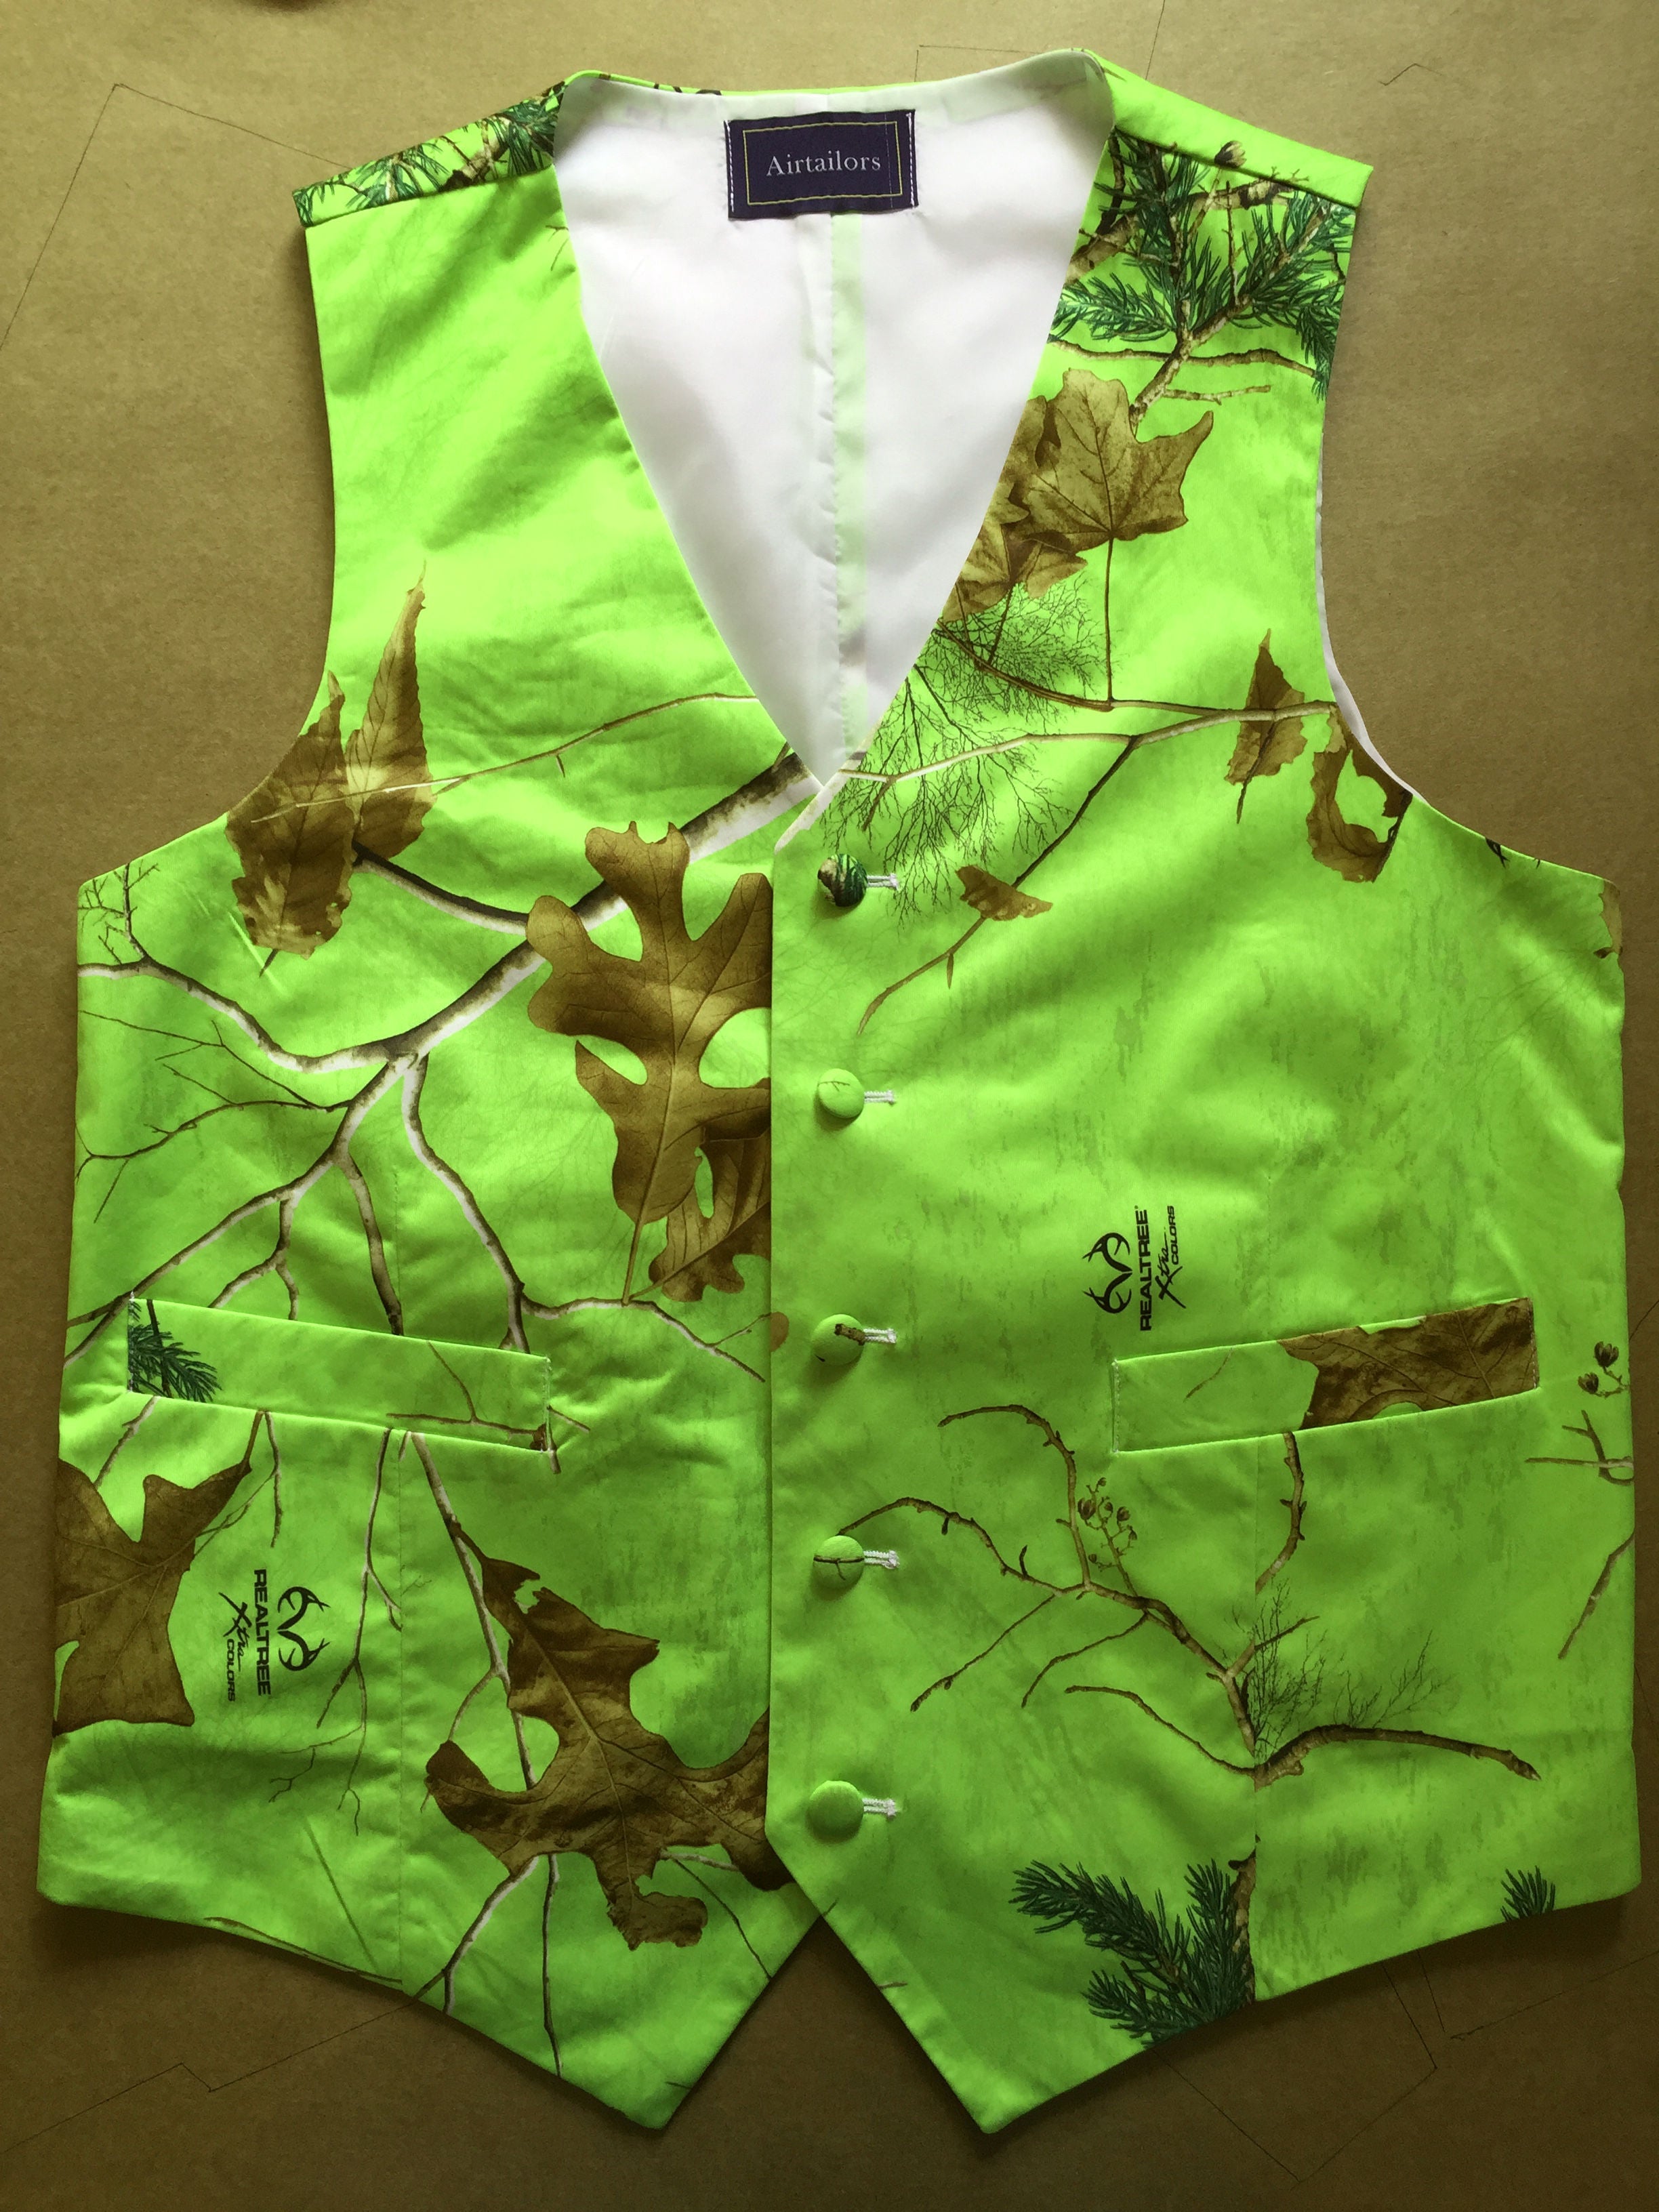 2019 Airtailor Designed Green Realtree Camouflage Vest for Rustic ...